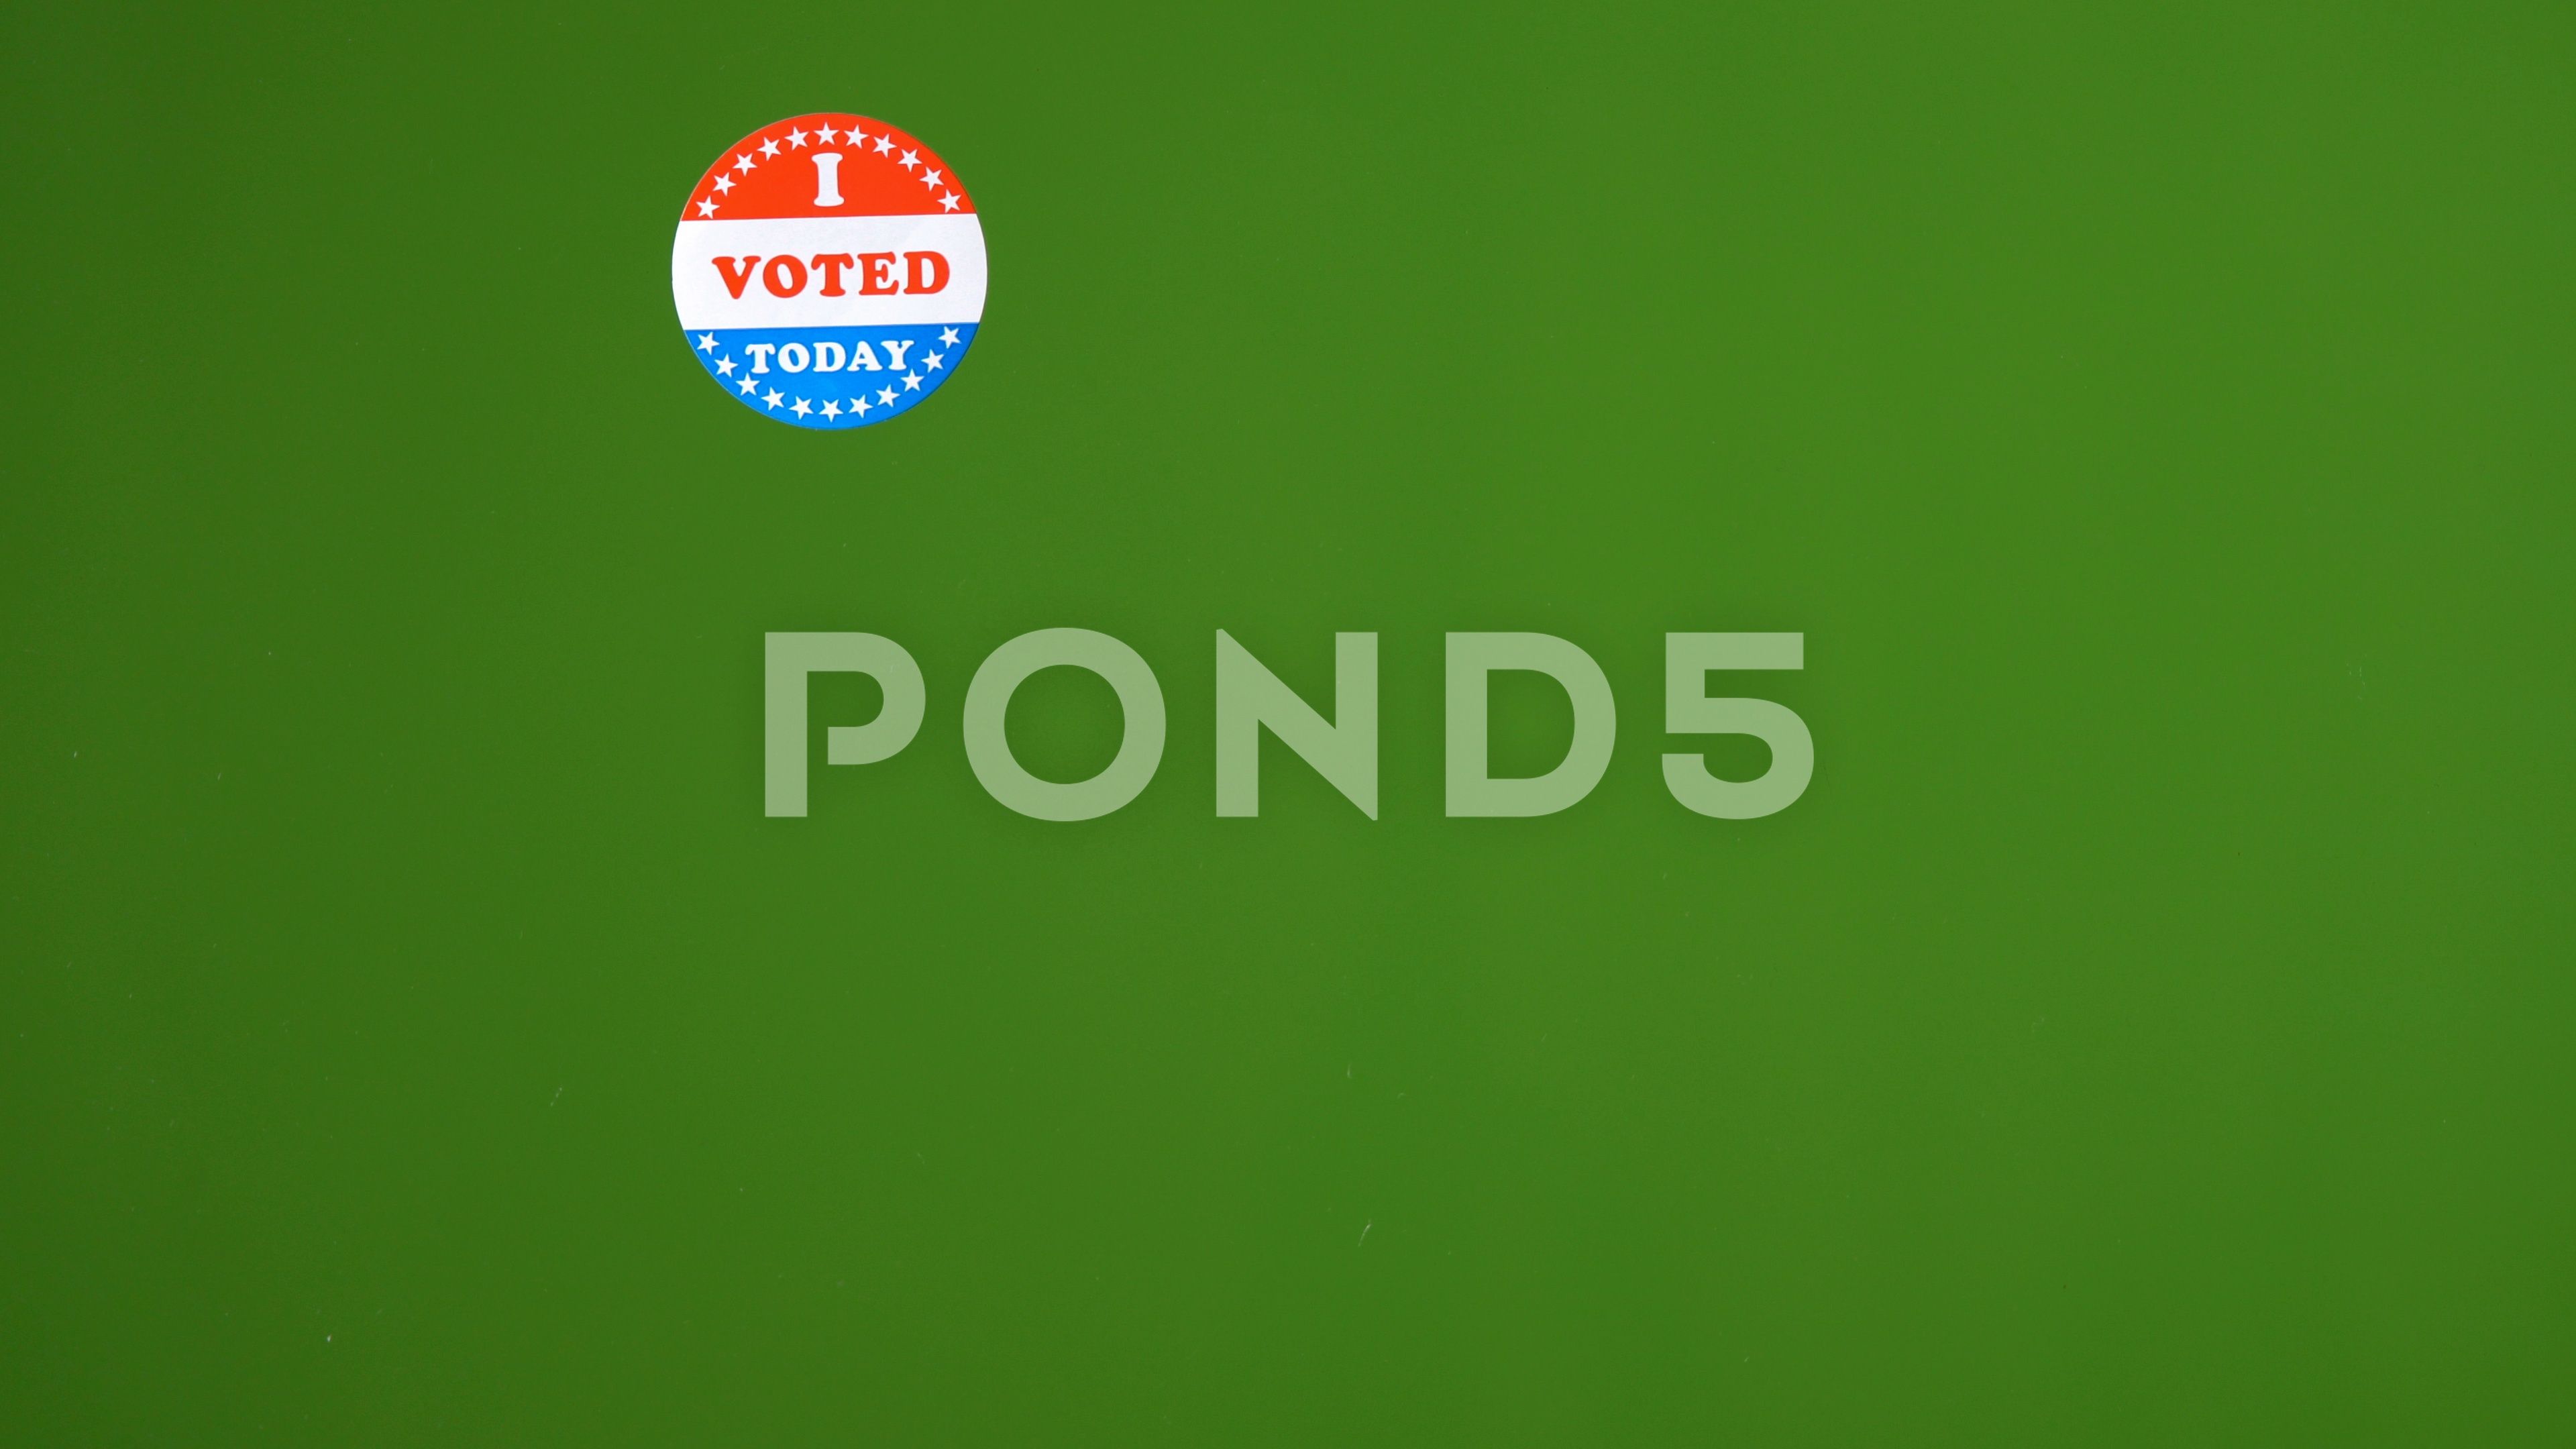 I Voted Stickers Appear One By On Top Of Background Green